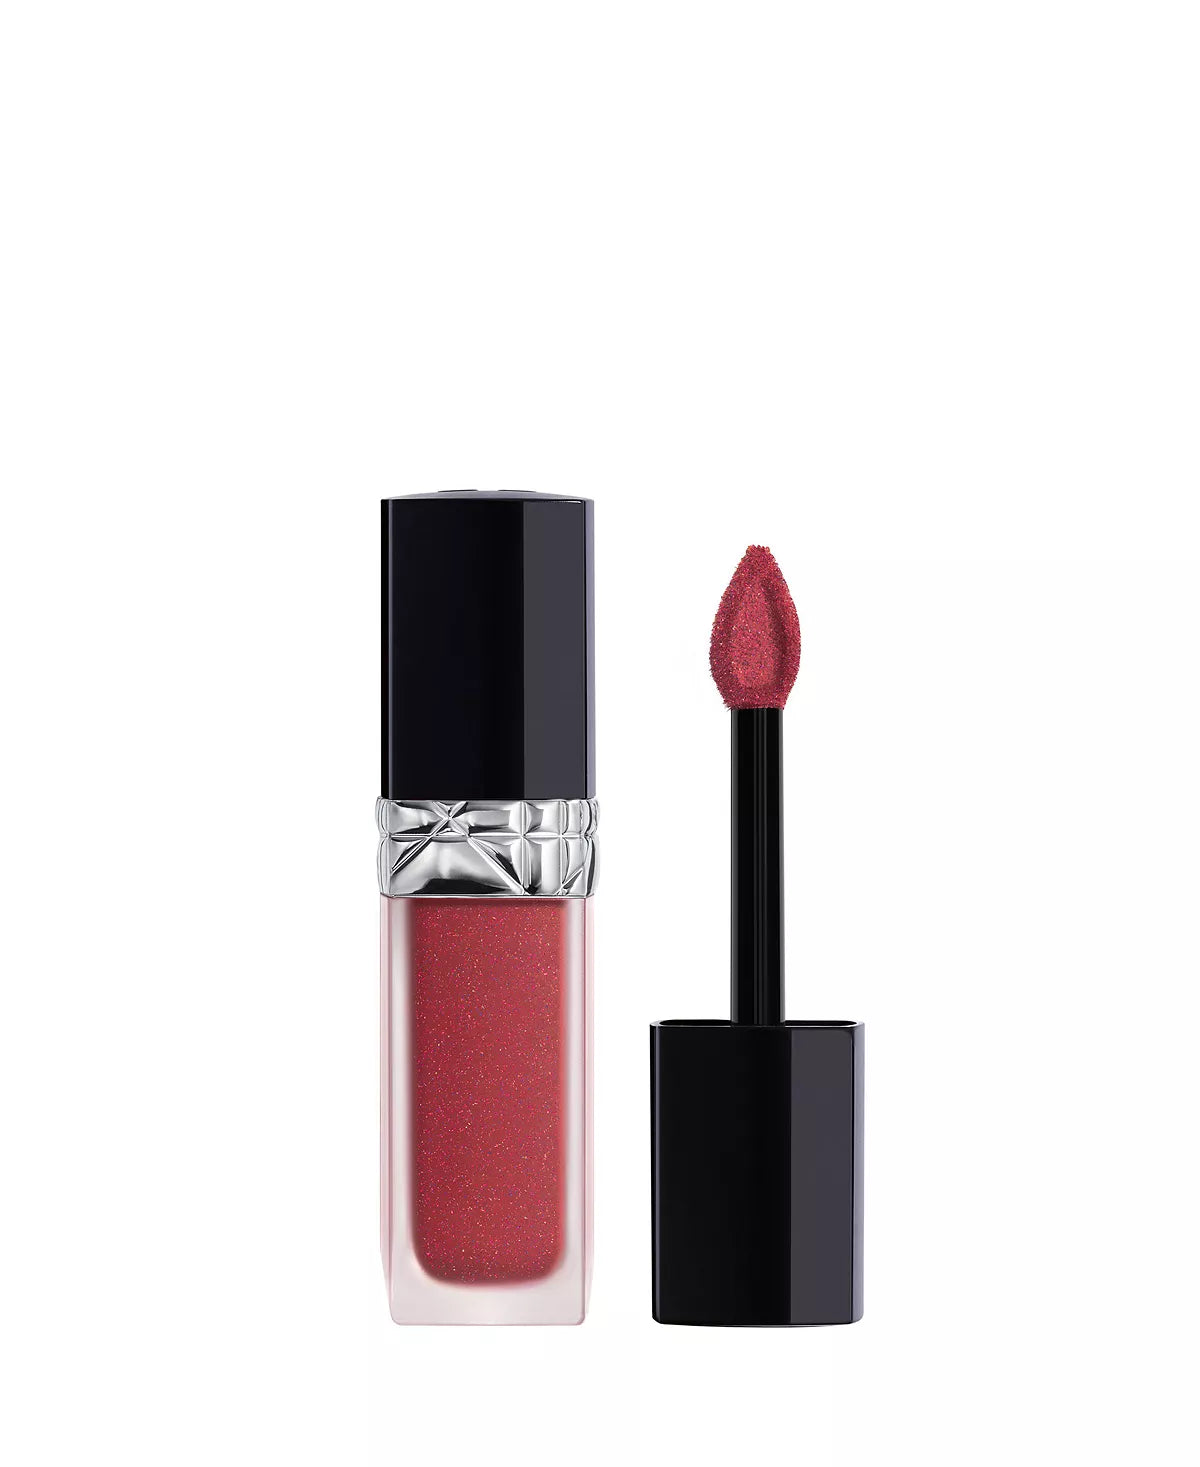 Dior Beauty Rouge Dior Forever Liquid Lipstick in Sequin Finish (Limited Edition)